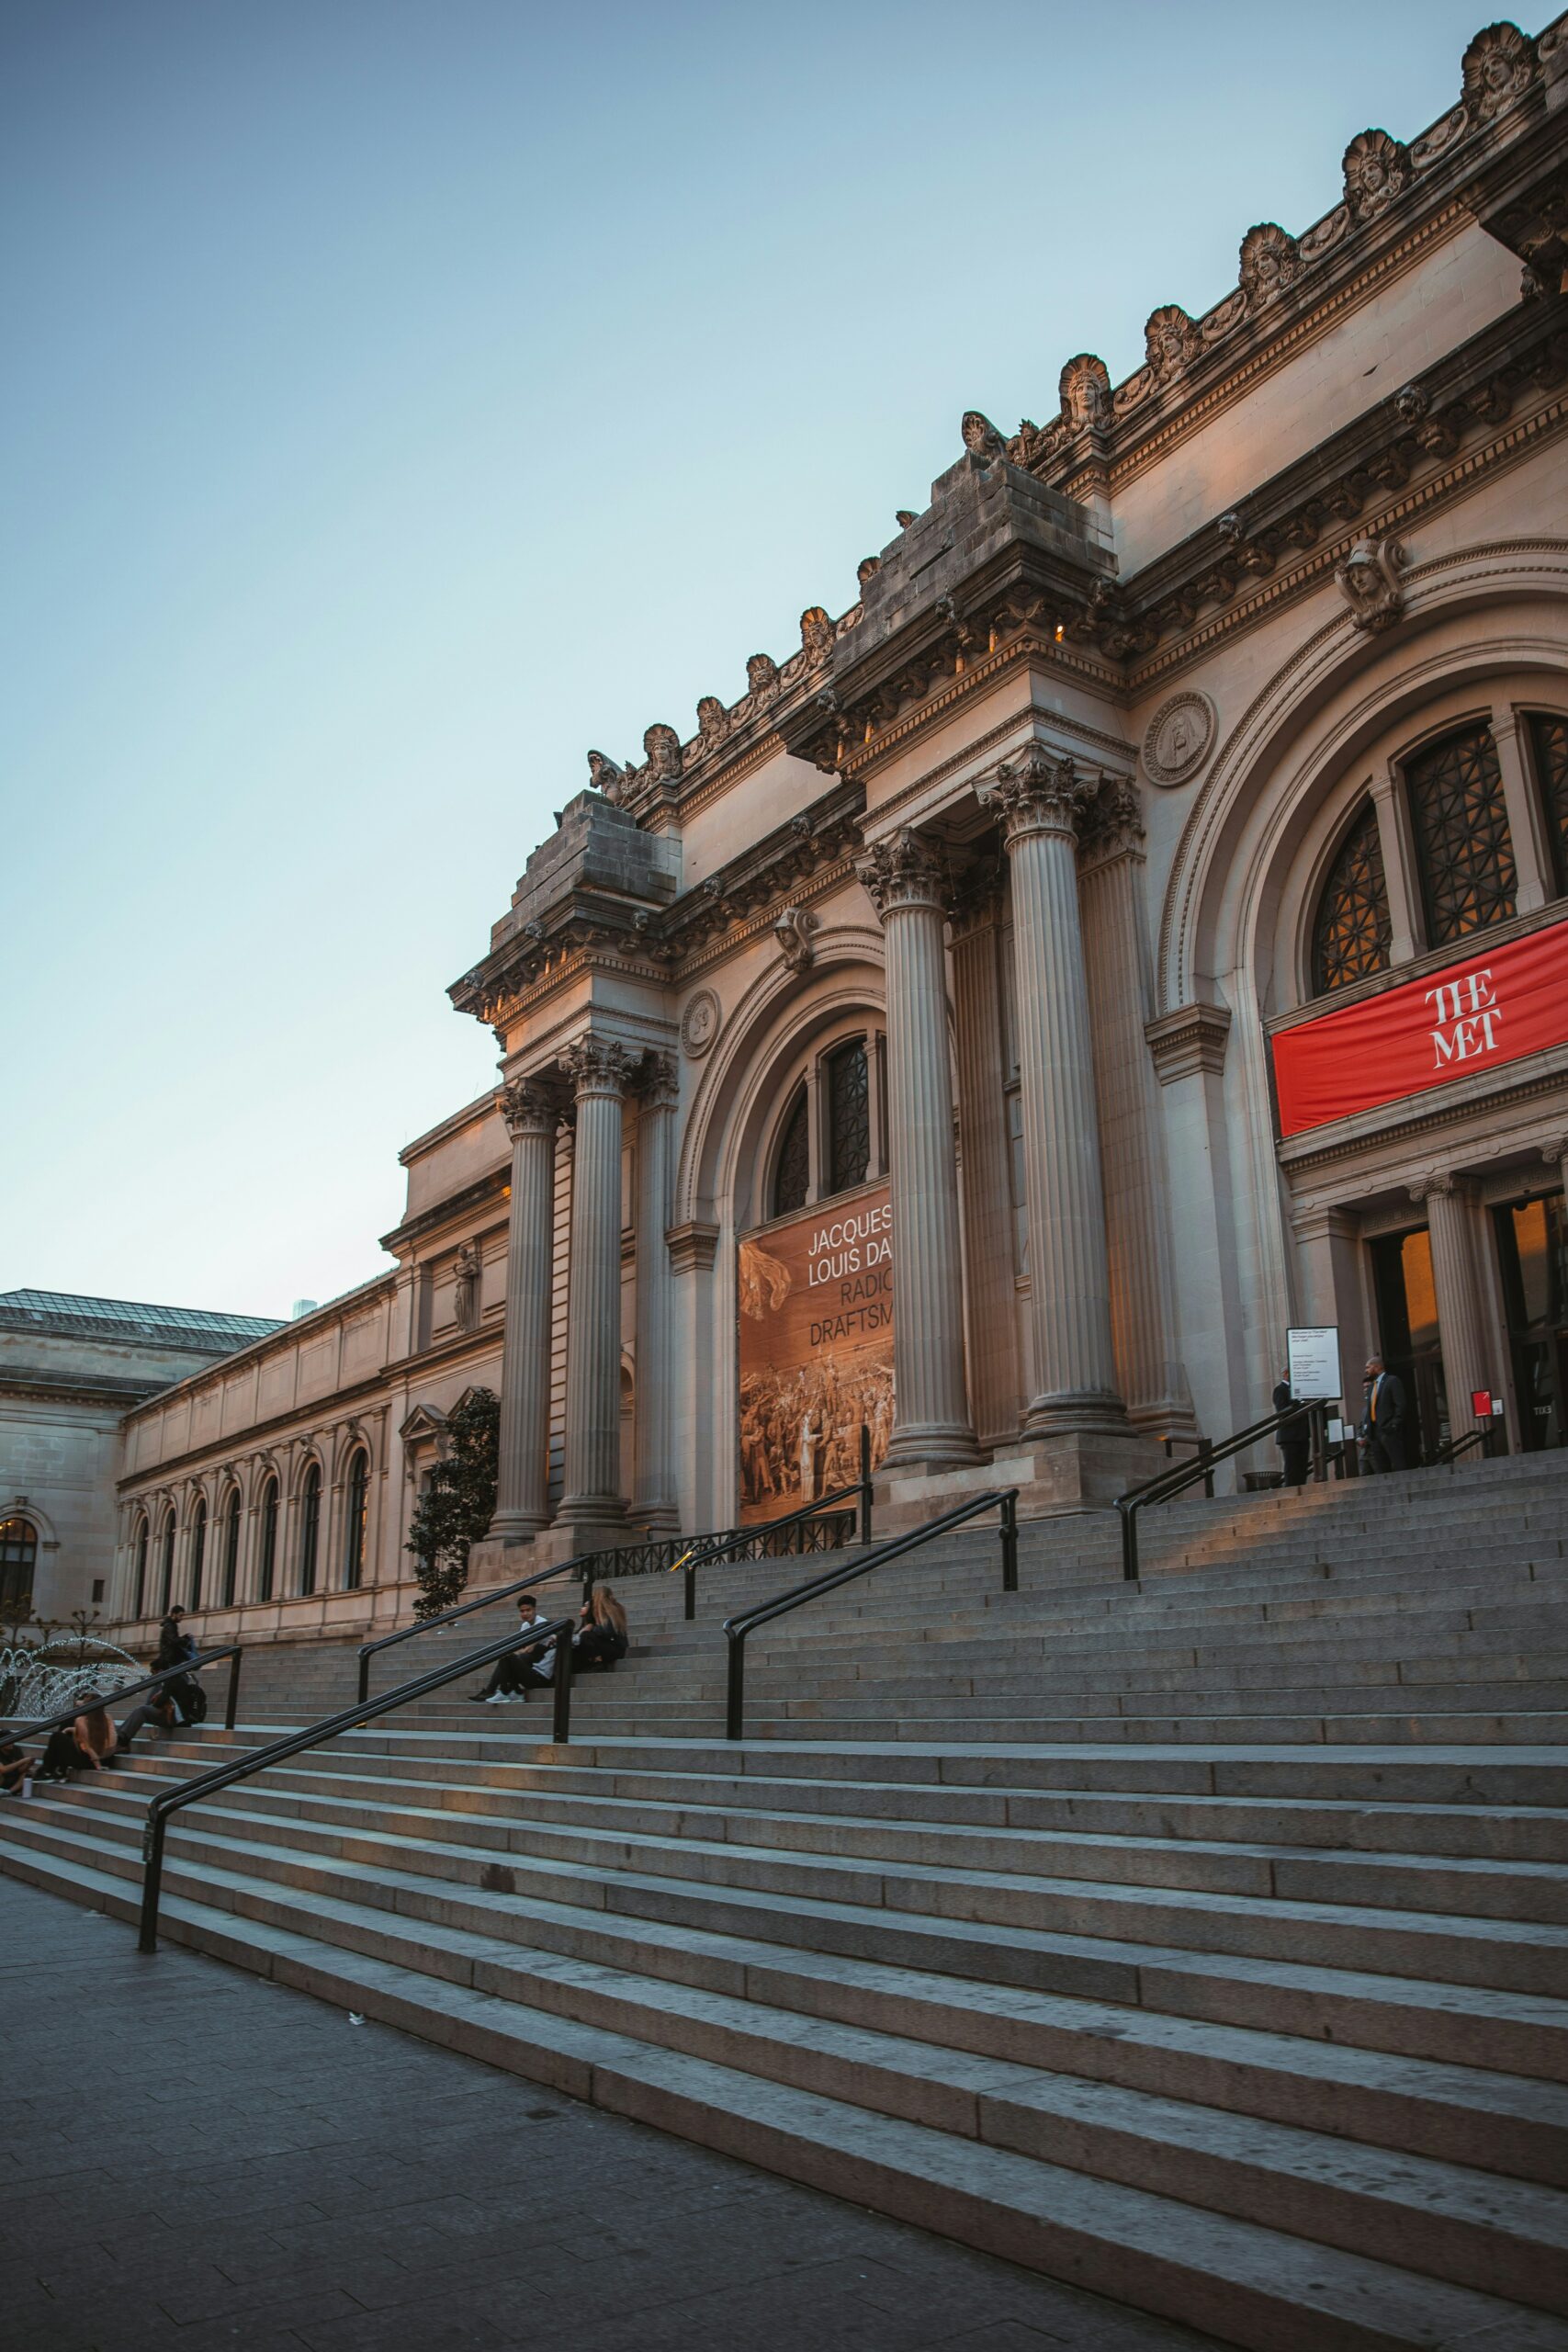 Entrance to the Metropolitan Museum of Art. There is a stone staircase leading up to regal pillars and arched doorways. A banner that reads “The Met” is displayed above the main door.